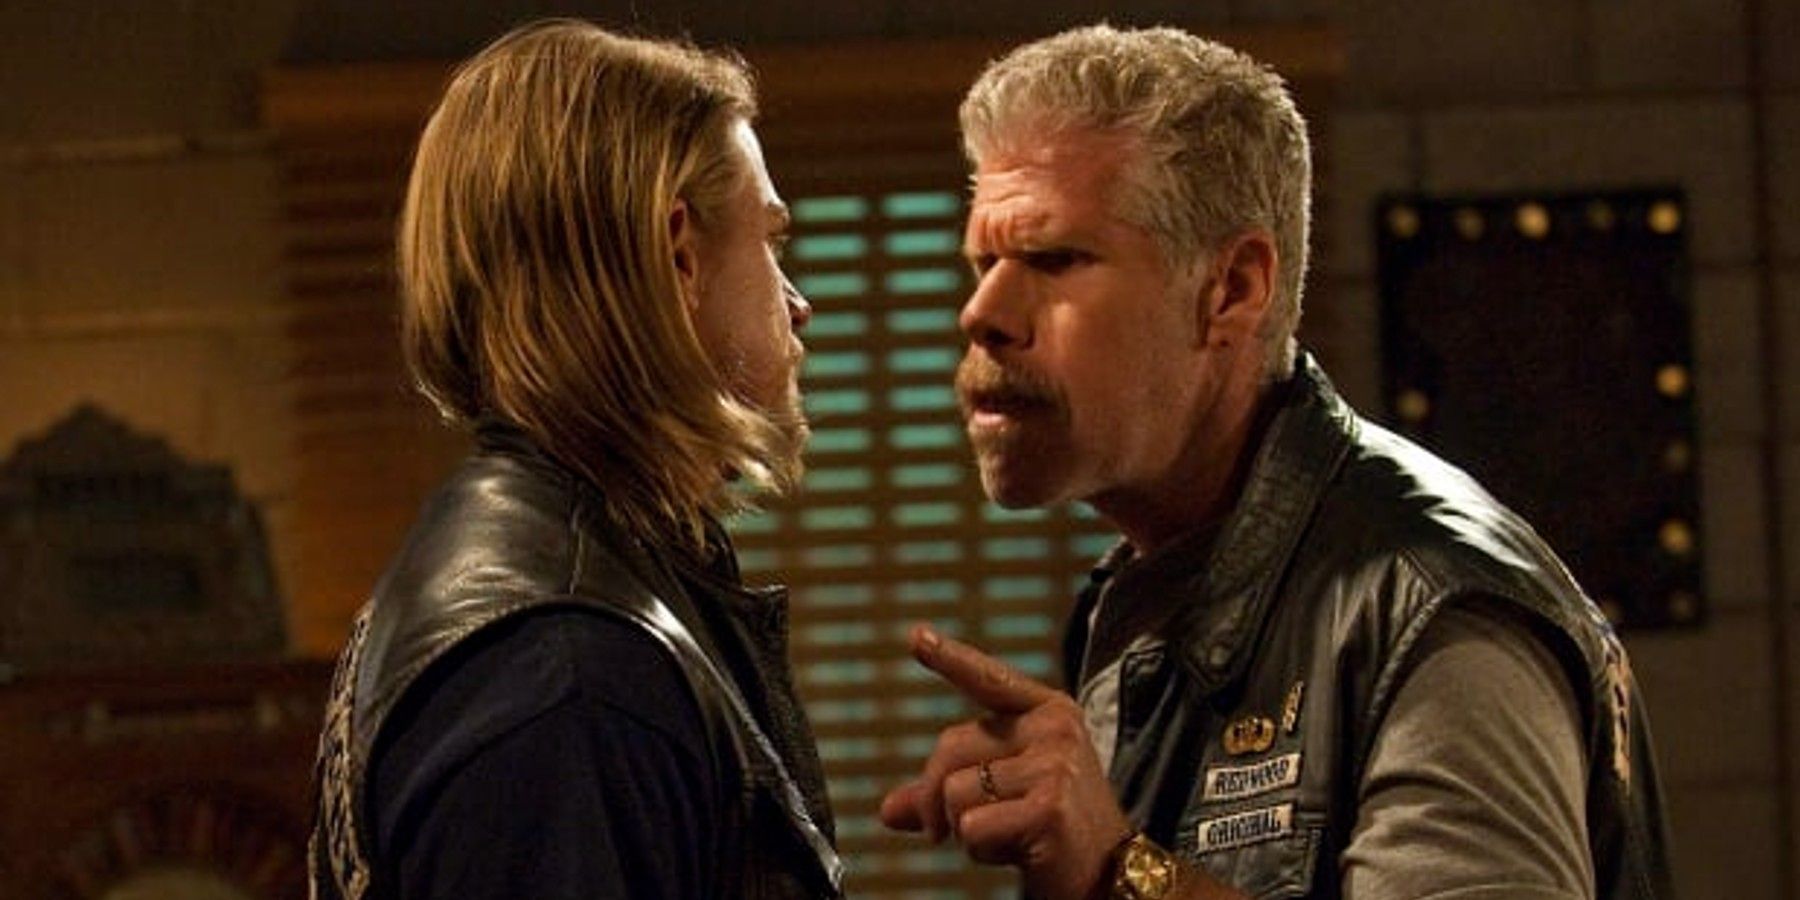 Jax Teller (Charlie Hunnam) and Clay Morrow (Ron Perlman) argue in Sons of Anarchy